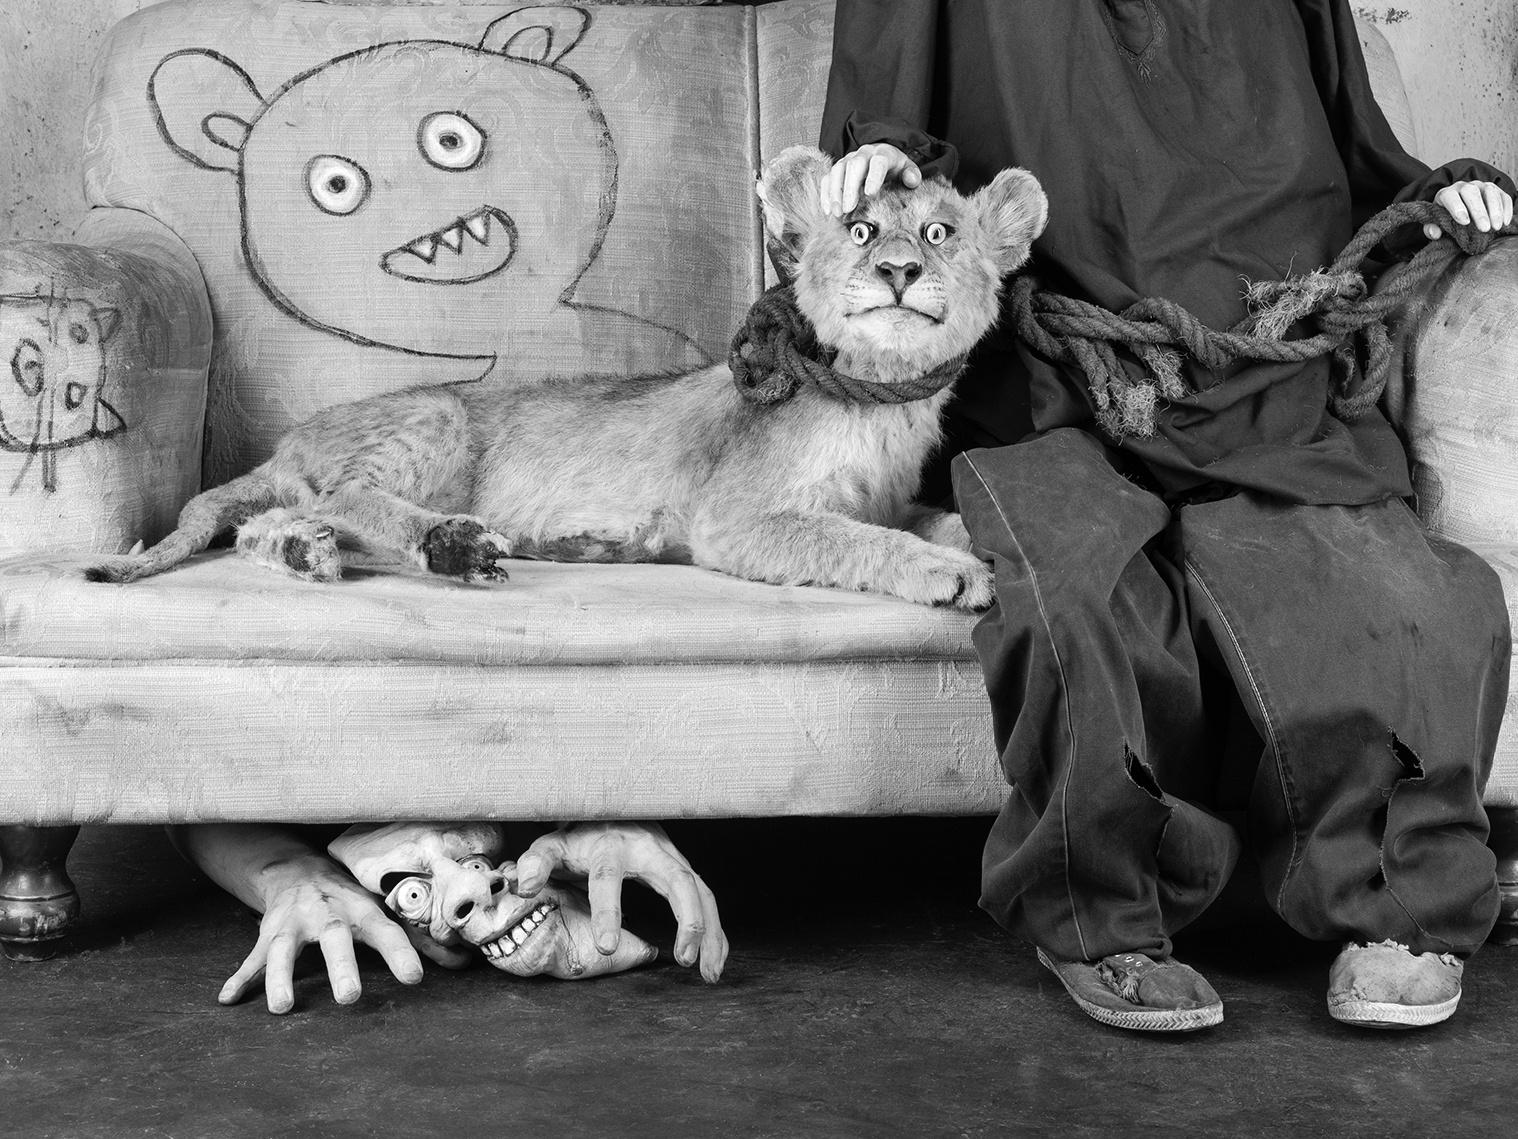 Roger BALLEN (*1950, America/South Africa)
Protector, 2015
Archival pigment print
61 x 43 cm (24 x 16 7/8 in.)
Edition of 9, plus 2 AP; Ed. no. 2/9
Print only

– Roger the Rat

Surreal, refined, disturbing: Roger Ballen has made a name for himself